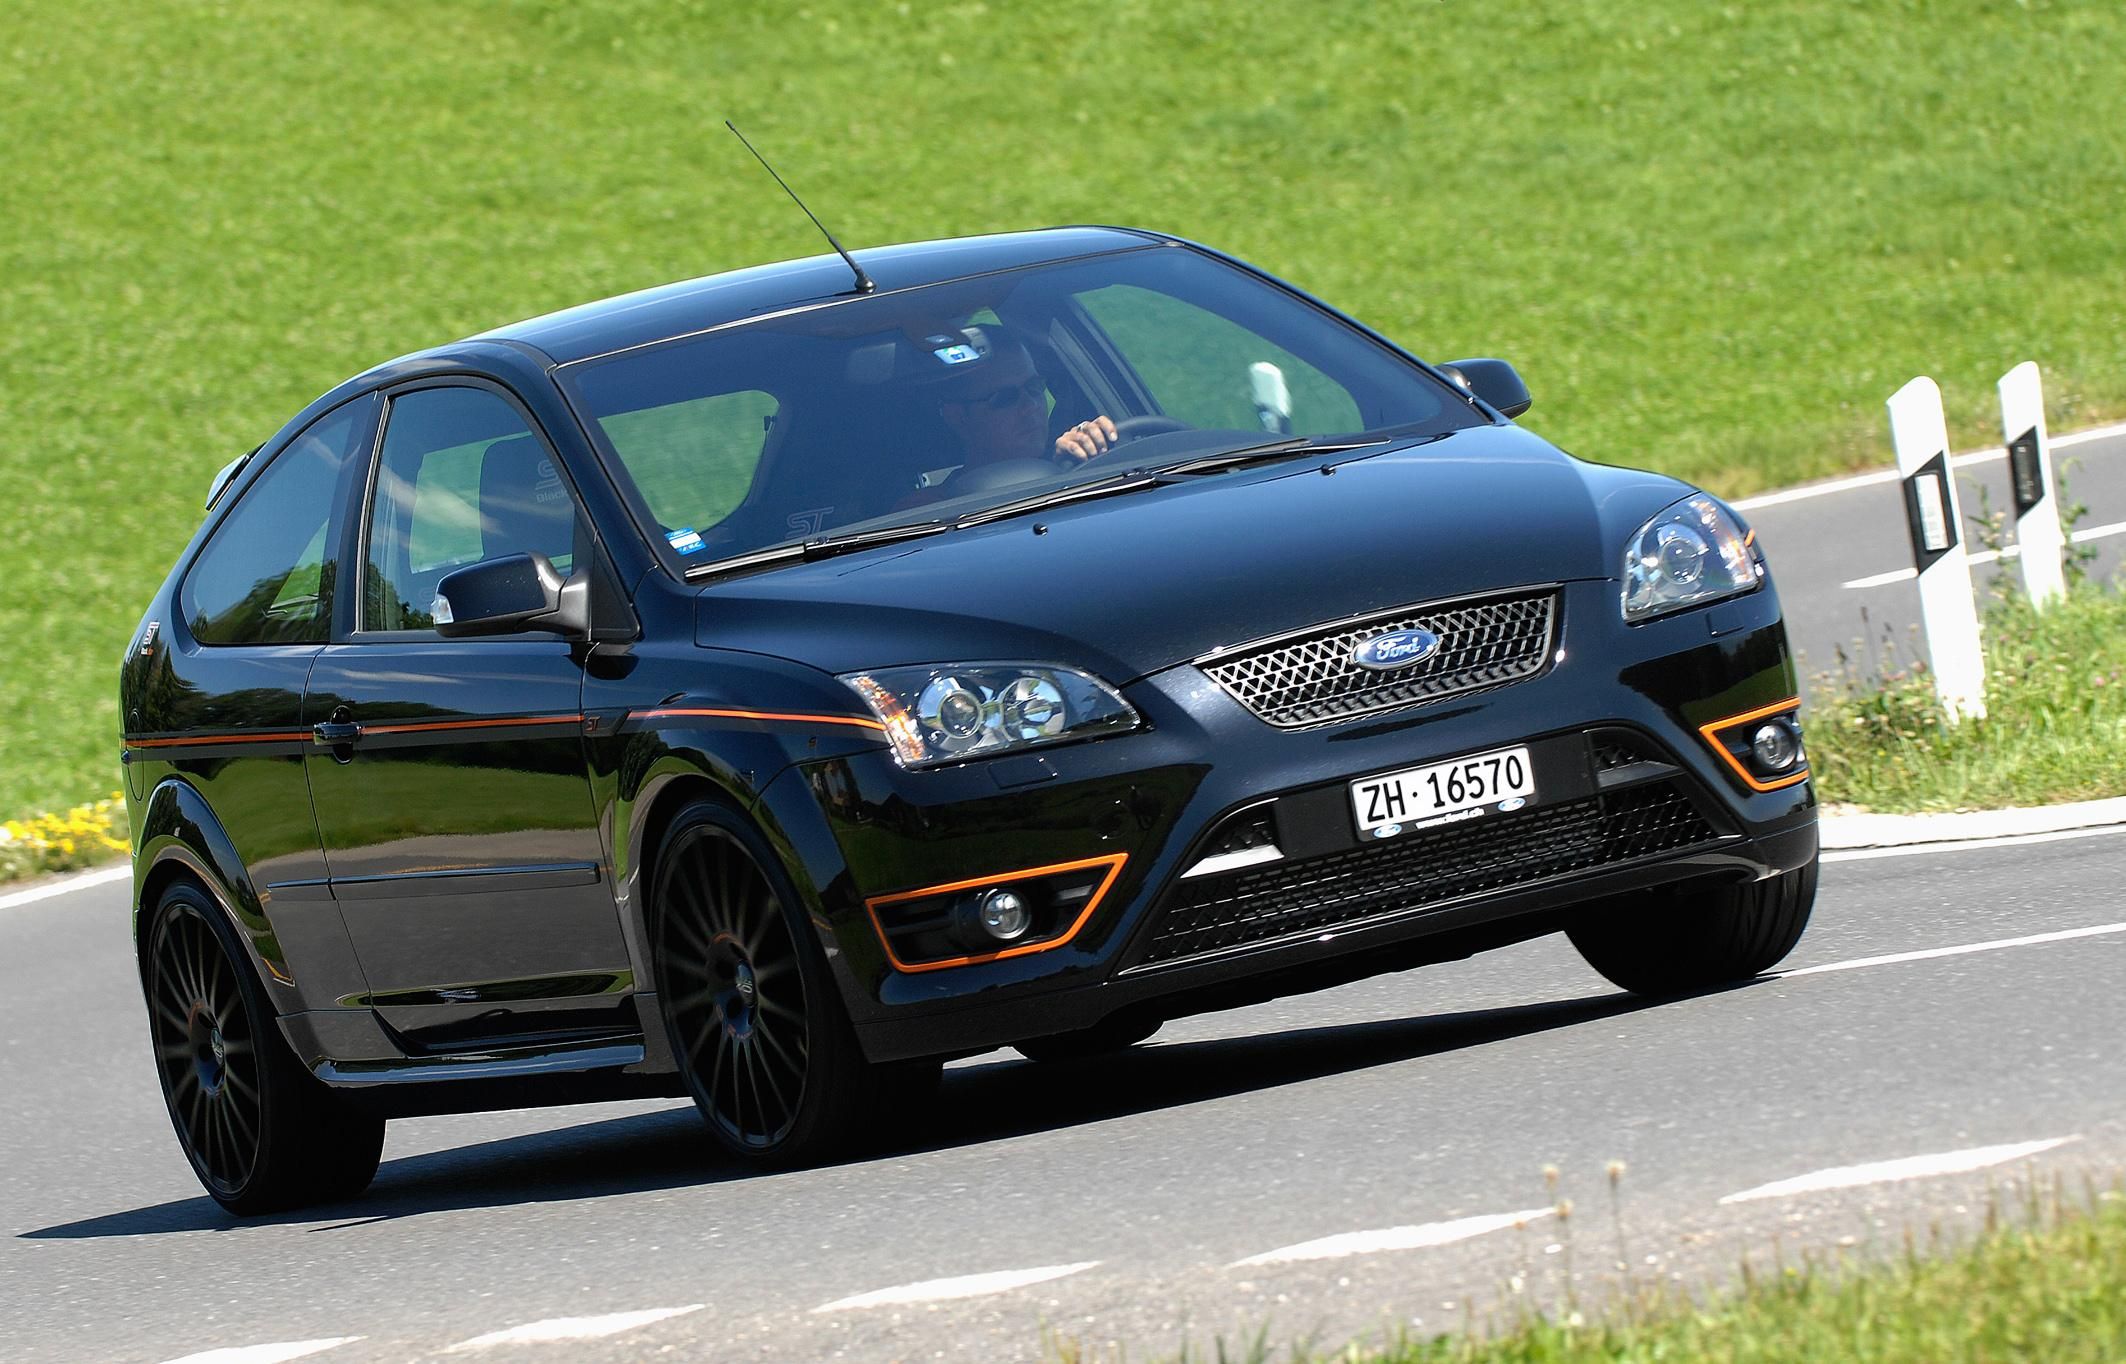 2007 Ford Focus ST Black Edition